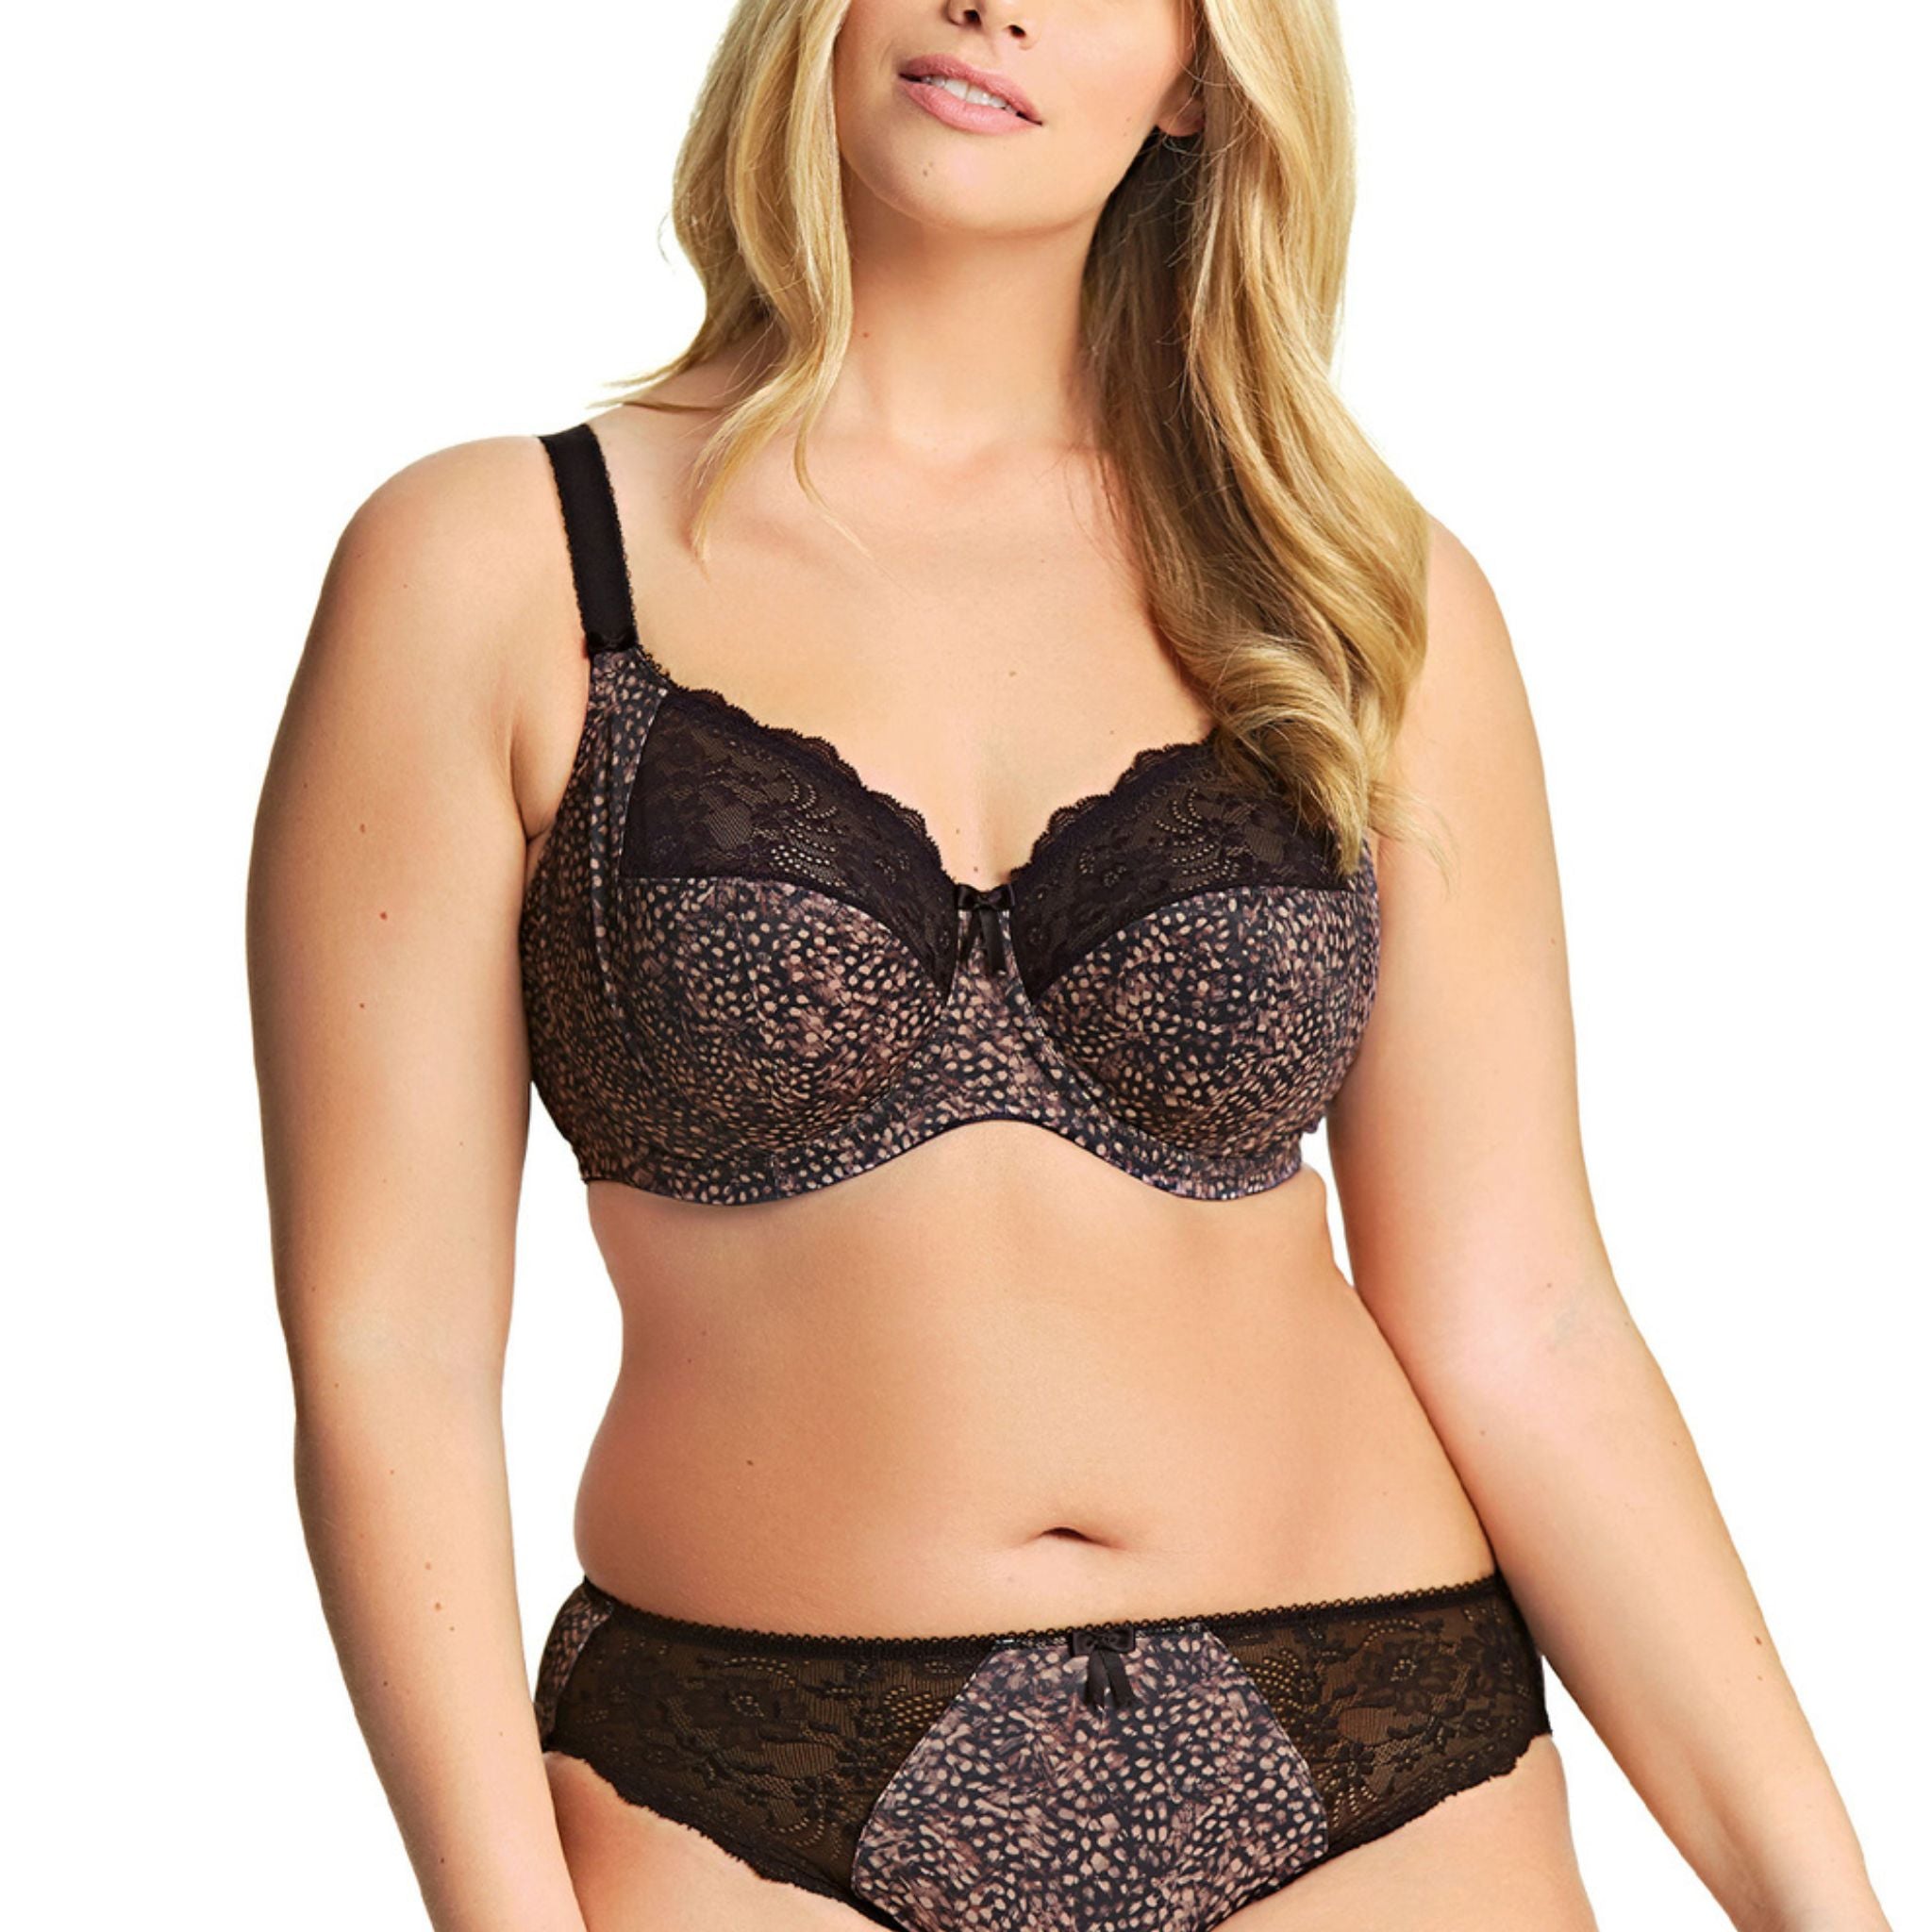 The bestselling Morgan collection is all about everyday comfort and style, the Banded Bra in Ebony showcases its signature print and beautiful stretch lace. Three section cups plus side frame offers ultimate support and shape in sizes DD – K.  Three-piece cups plus side support offers perfect forward shape  Stretch lace top cups create a rounded shape  Elasticated neck edge for ease of fit  Complete with a pretty bow detail